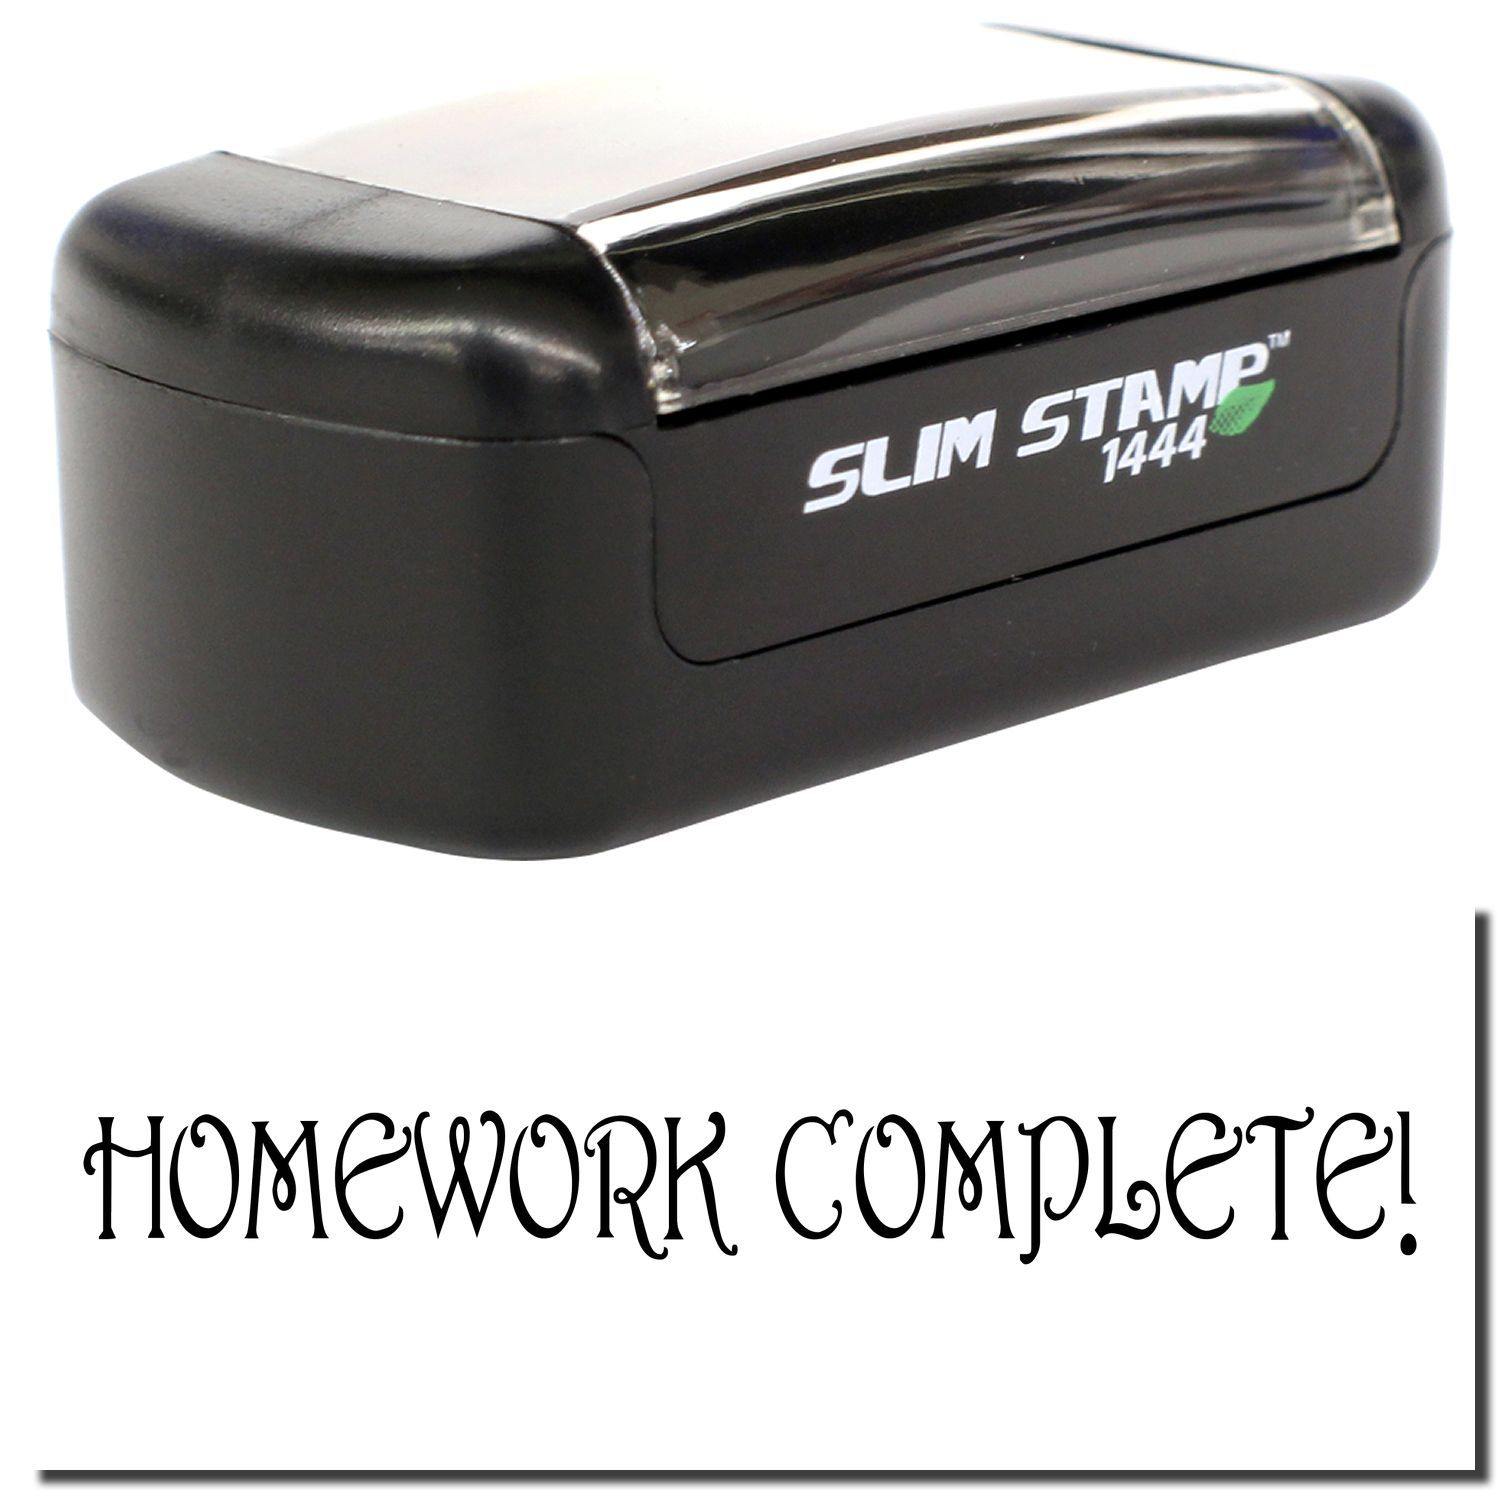 A stock office pre-inked stamp with a stamped image showing how the text "HOMEWORK COMPLETE!" is displayed after stamping.